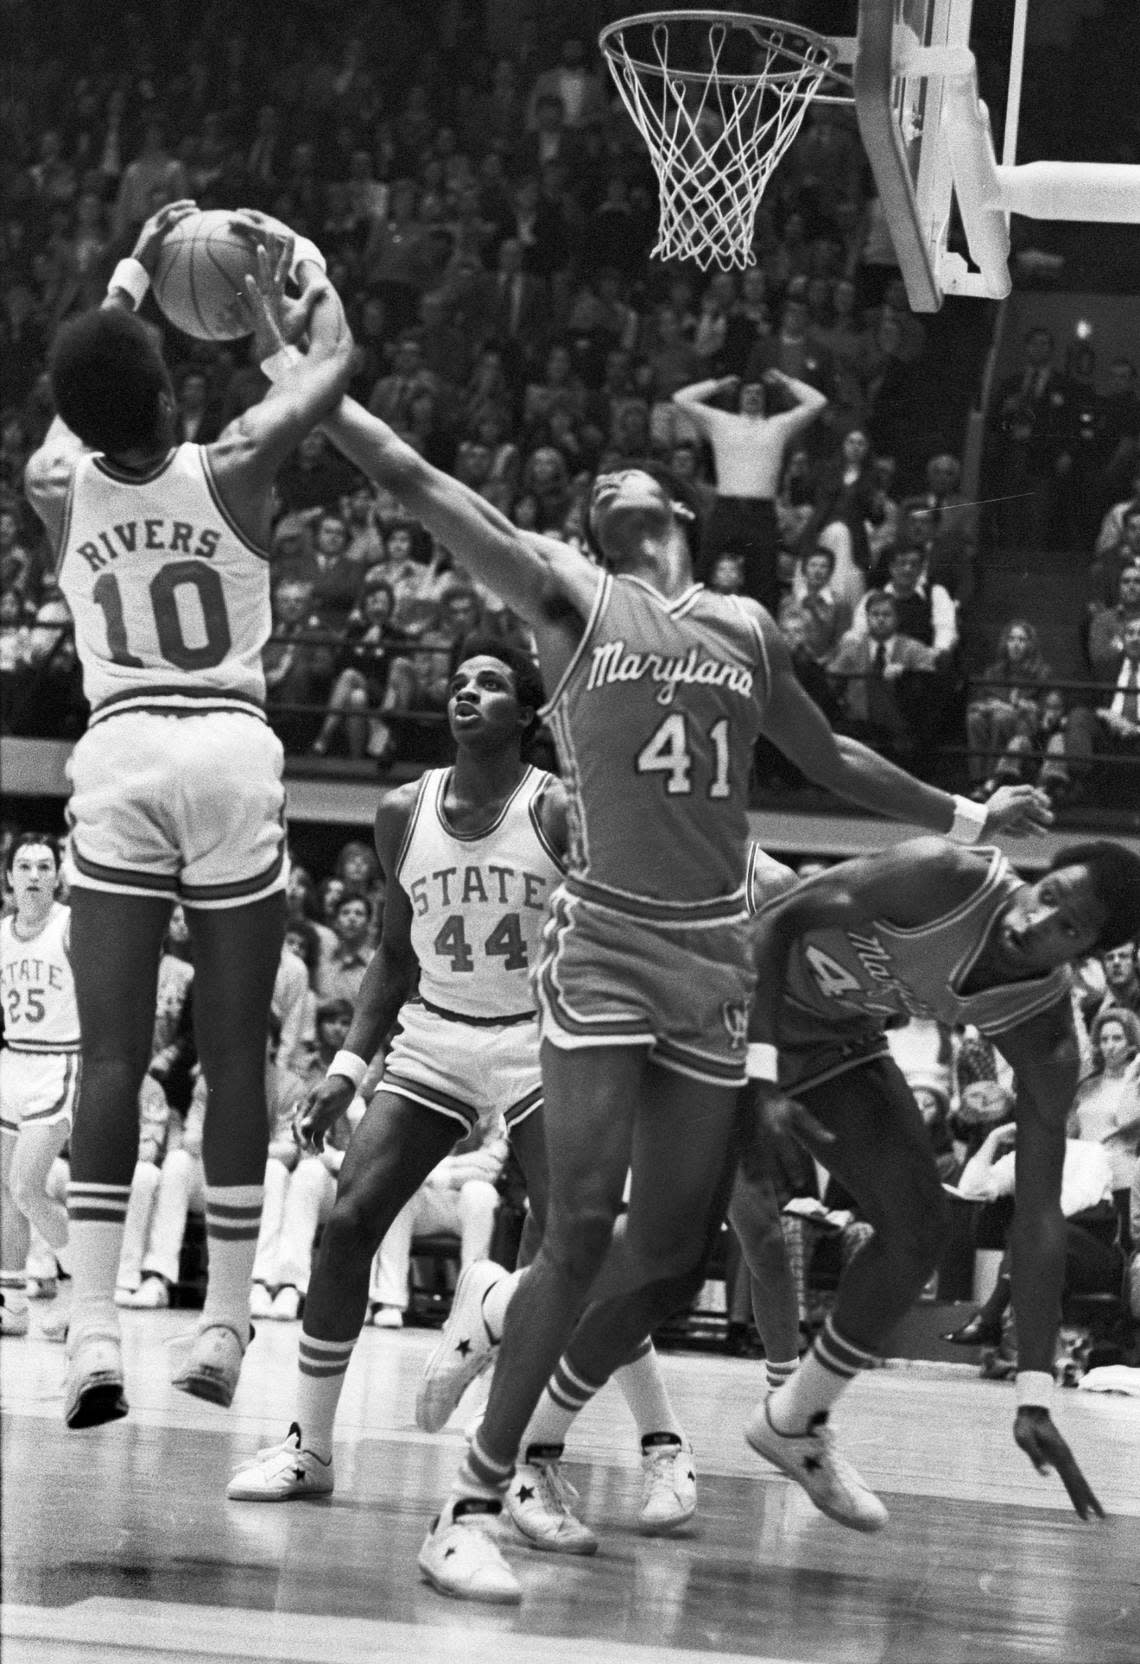 NC State’s Moe Rivers (10) battles for the ball with Maryland’s Len Elmore (41) during the Wolfpack’s win over Maryland in 1974 in Reynolds Coliseum.